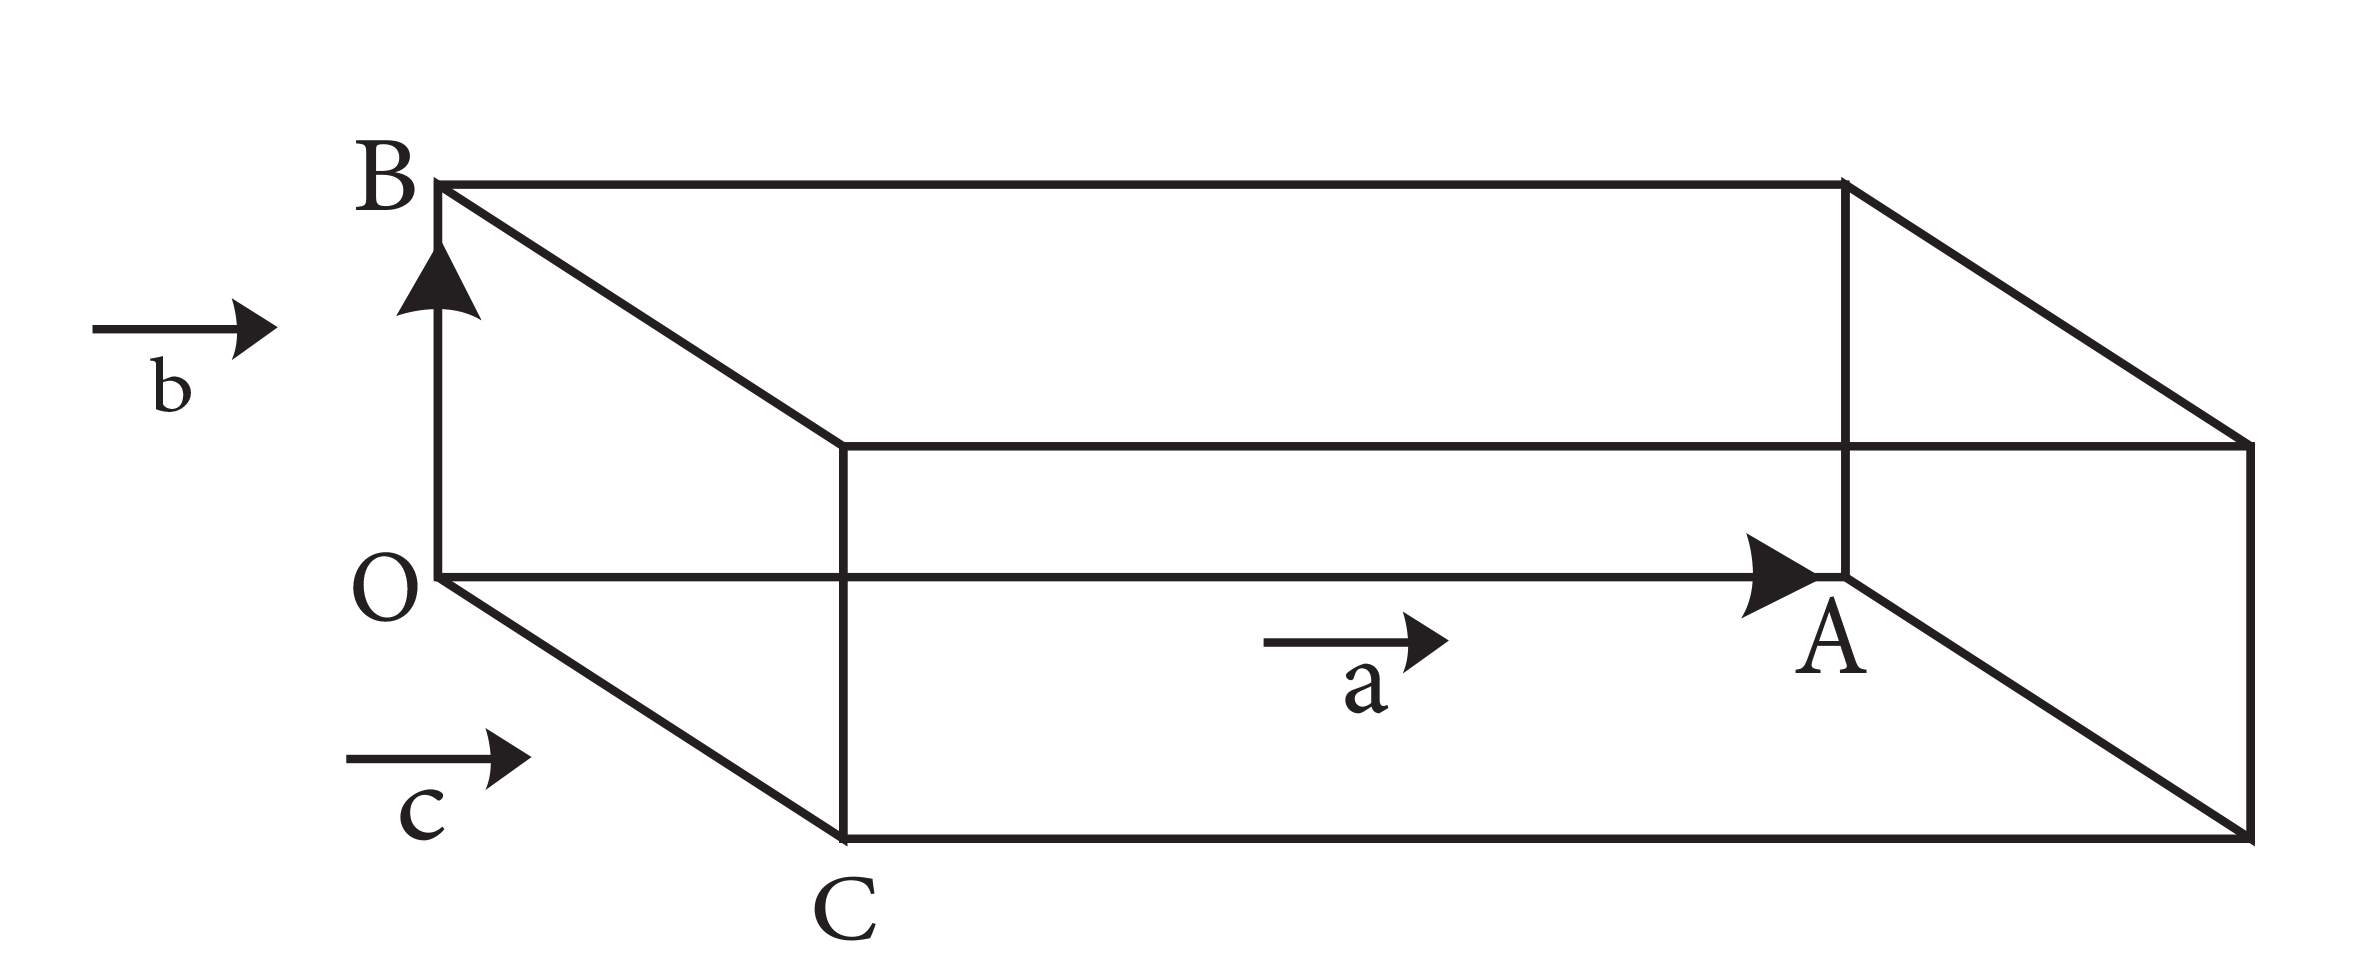 Area of parallelopiped